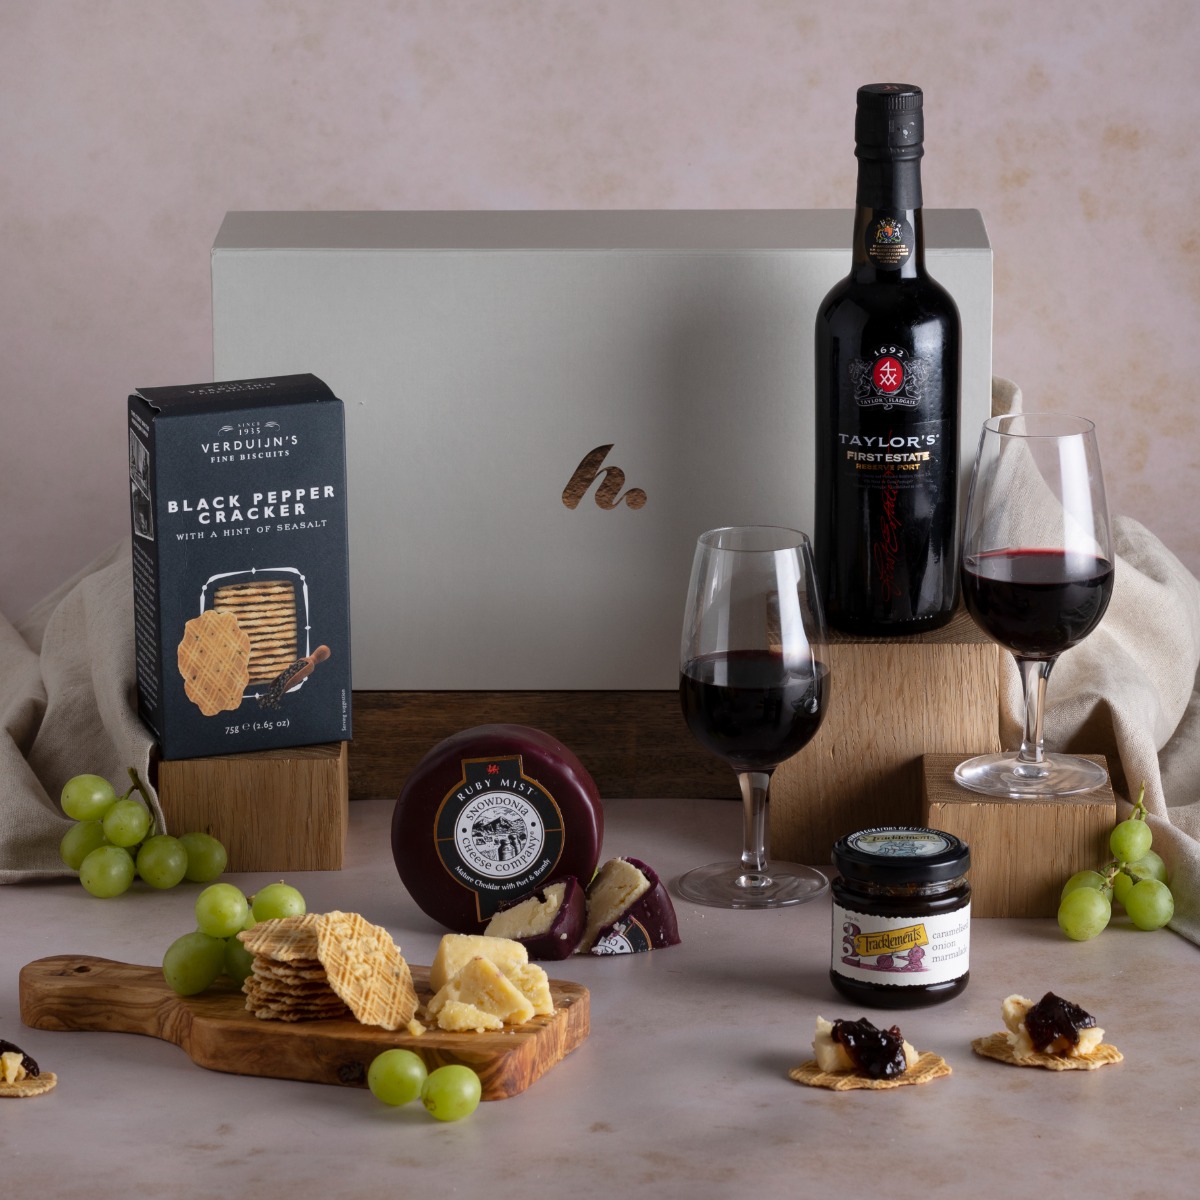 Classic Port and Cheese Hamper with content and a glass of port on display